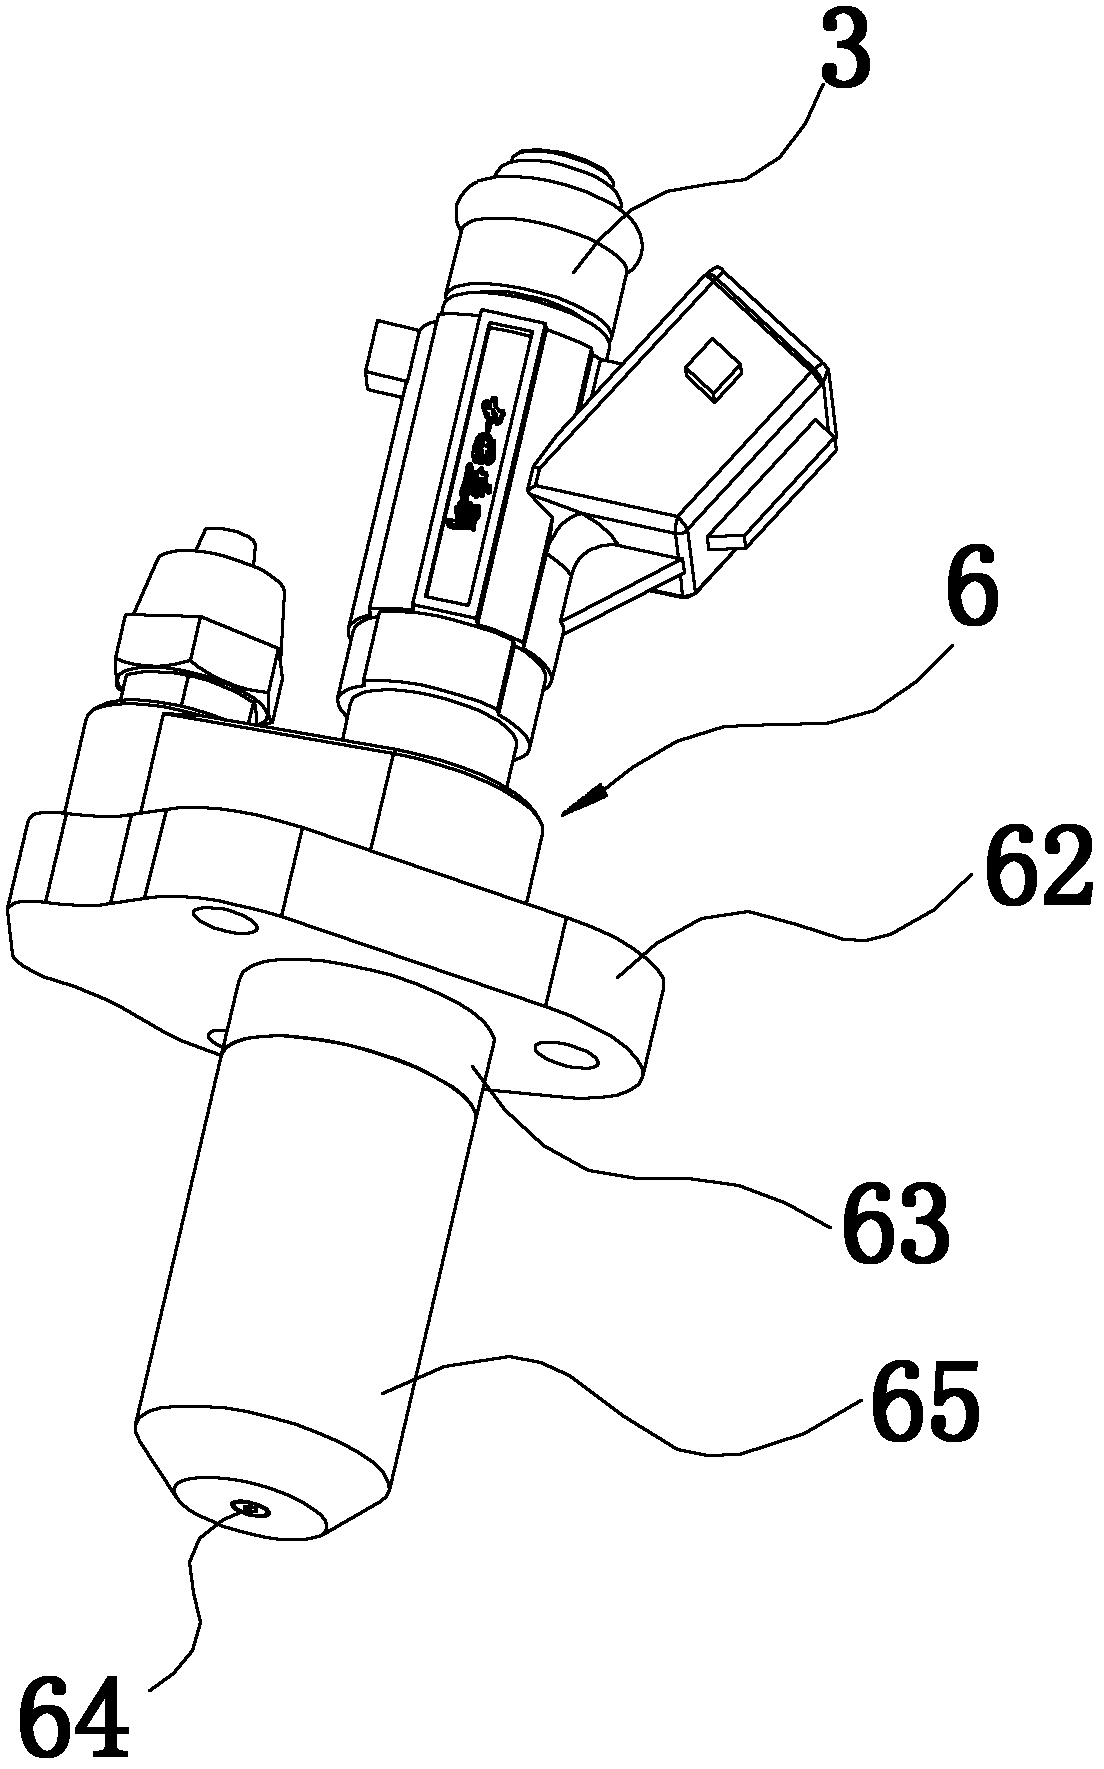 Selective catalytic reduction (SCR) system with external mixing nozzle metering structure